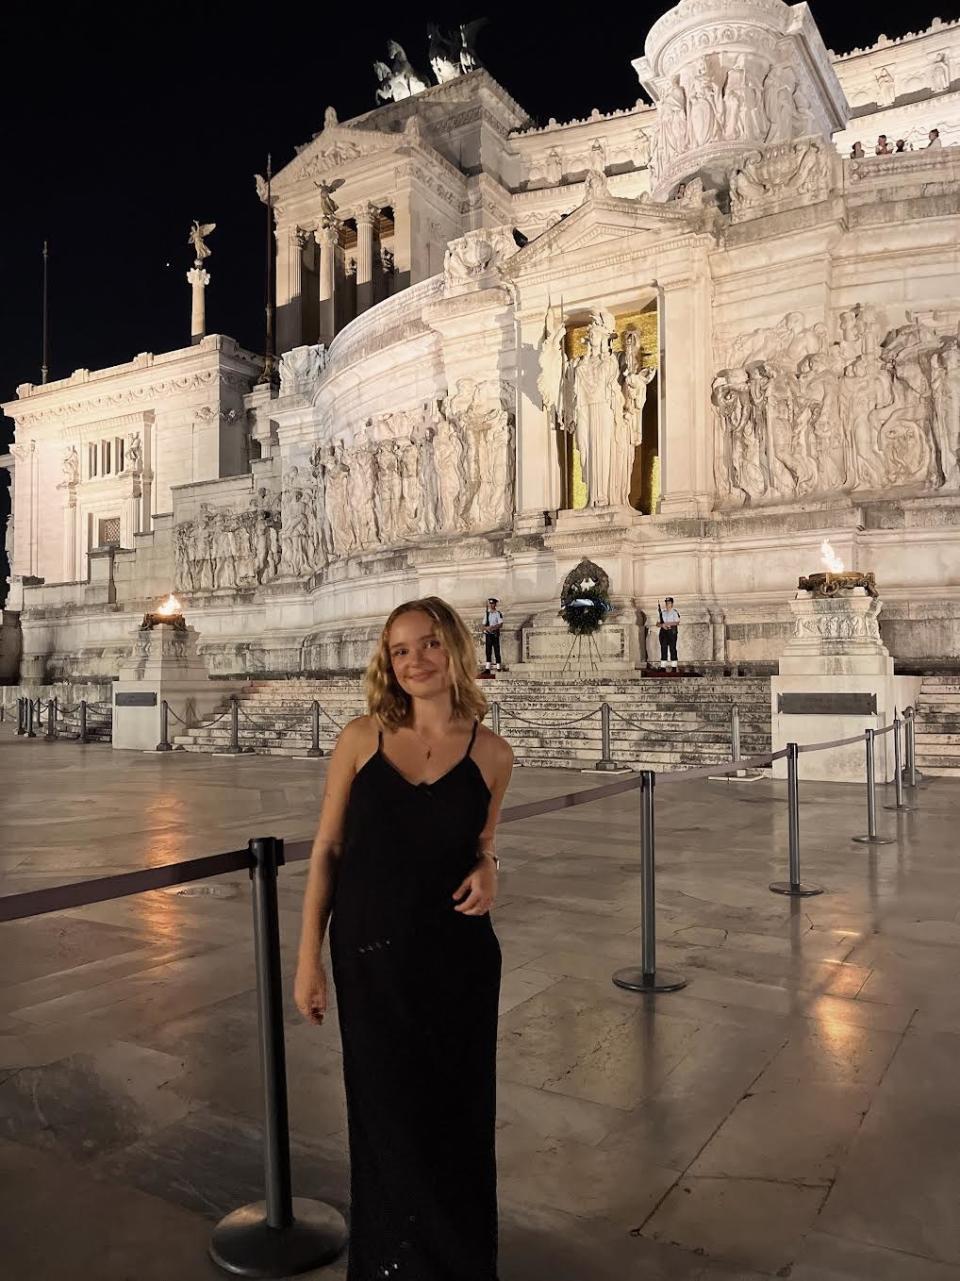 Datskovska on a trip in Rome while studying abroad